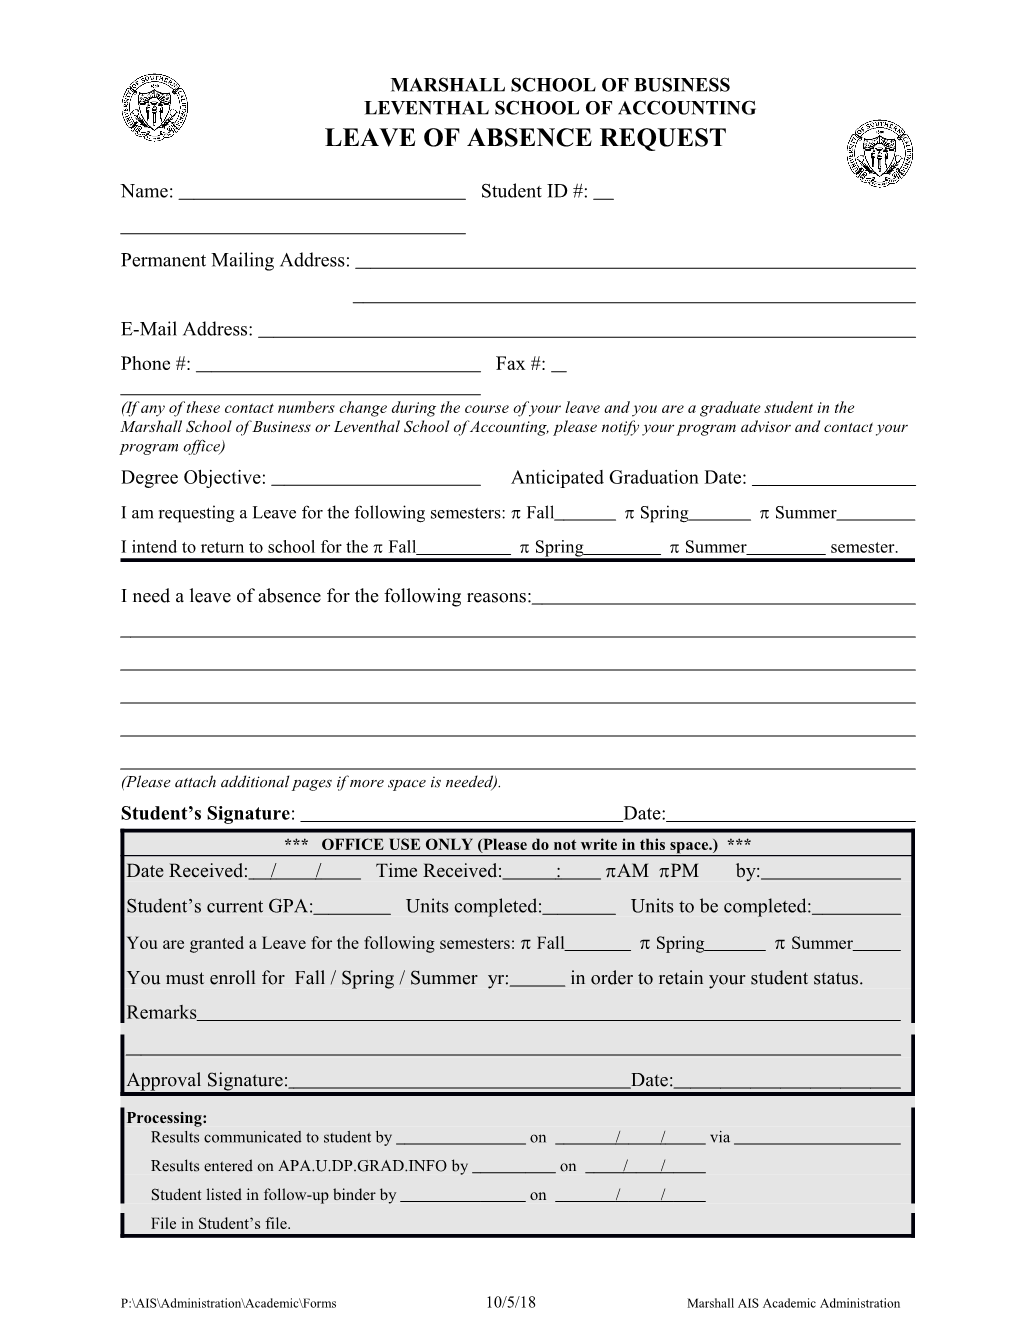 Marshall Leave of Absence Request Form